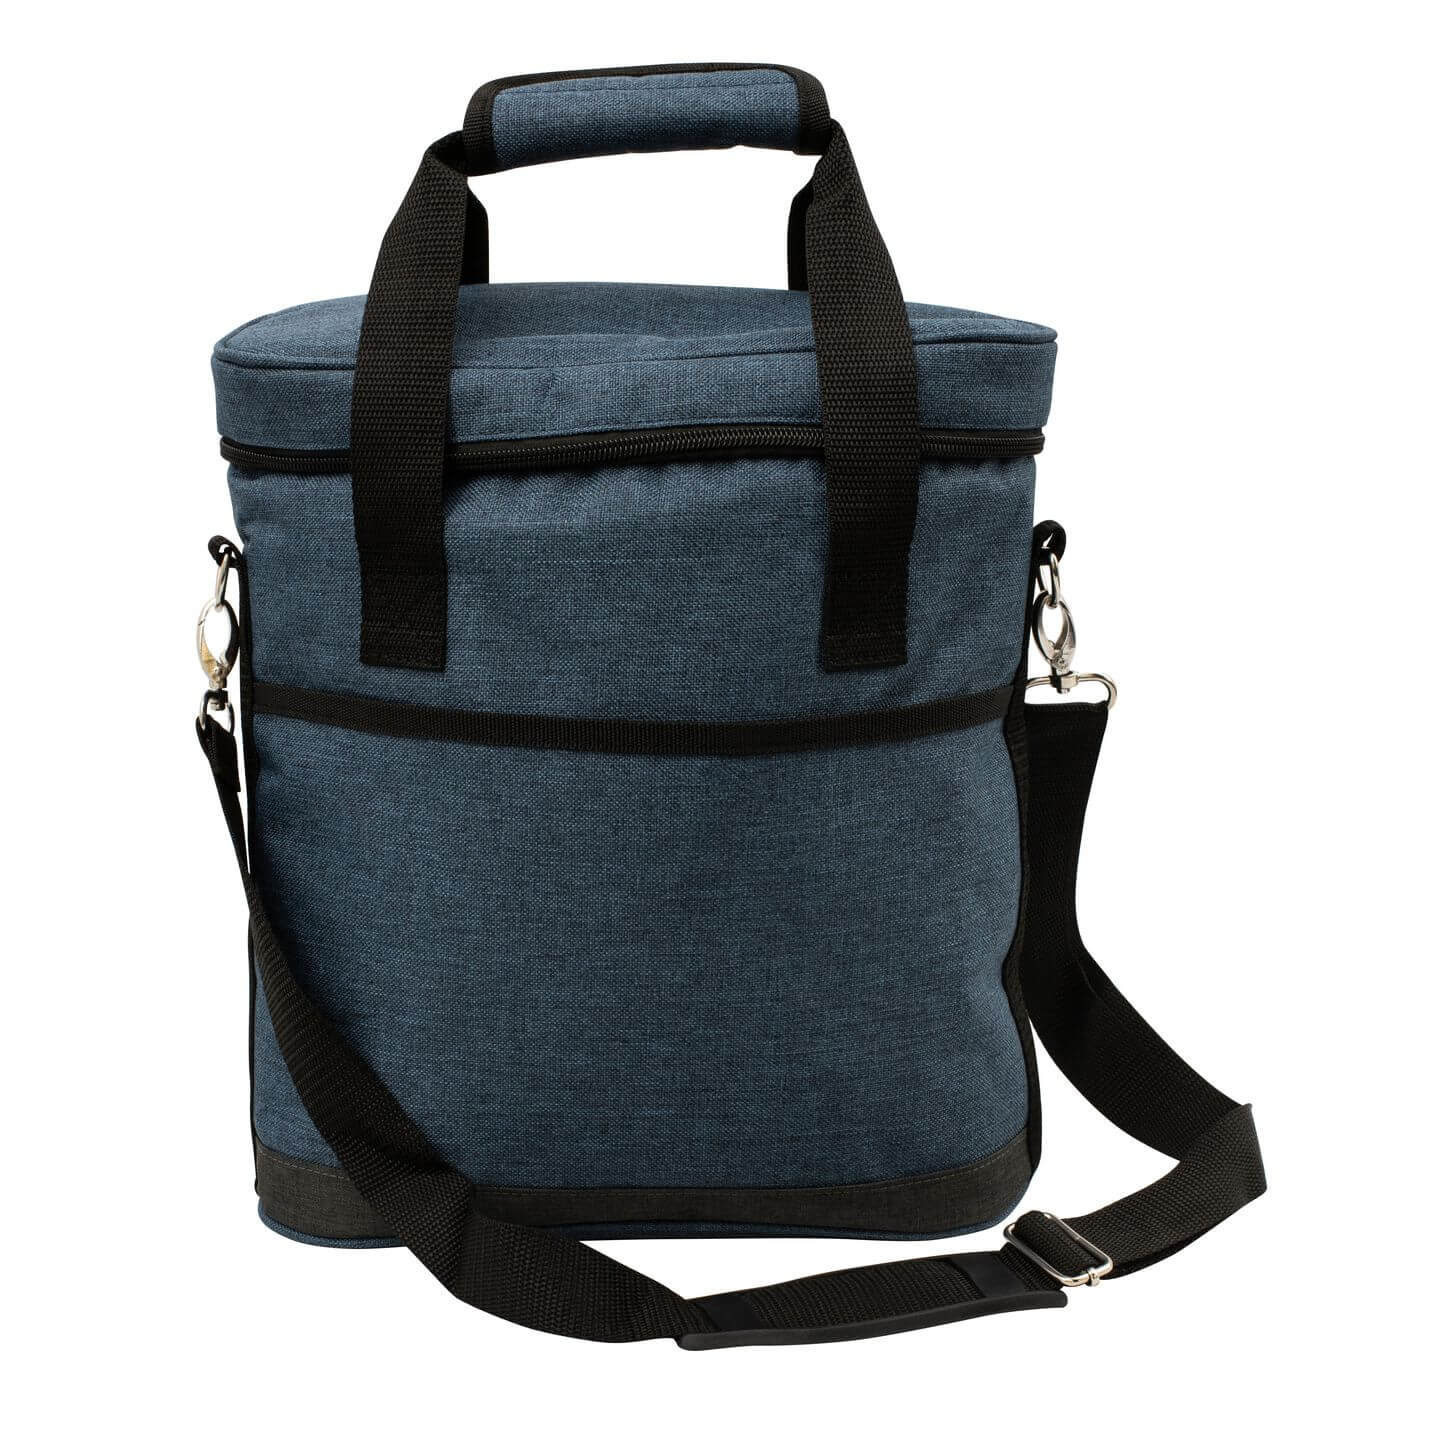 A navy blue insulated wine carry bag with a black shoulder strap